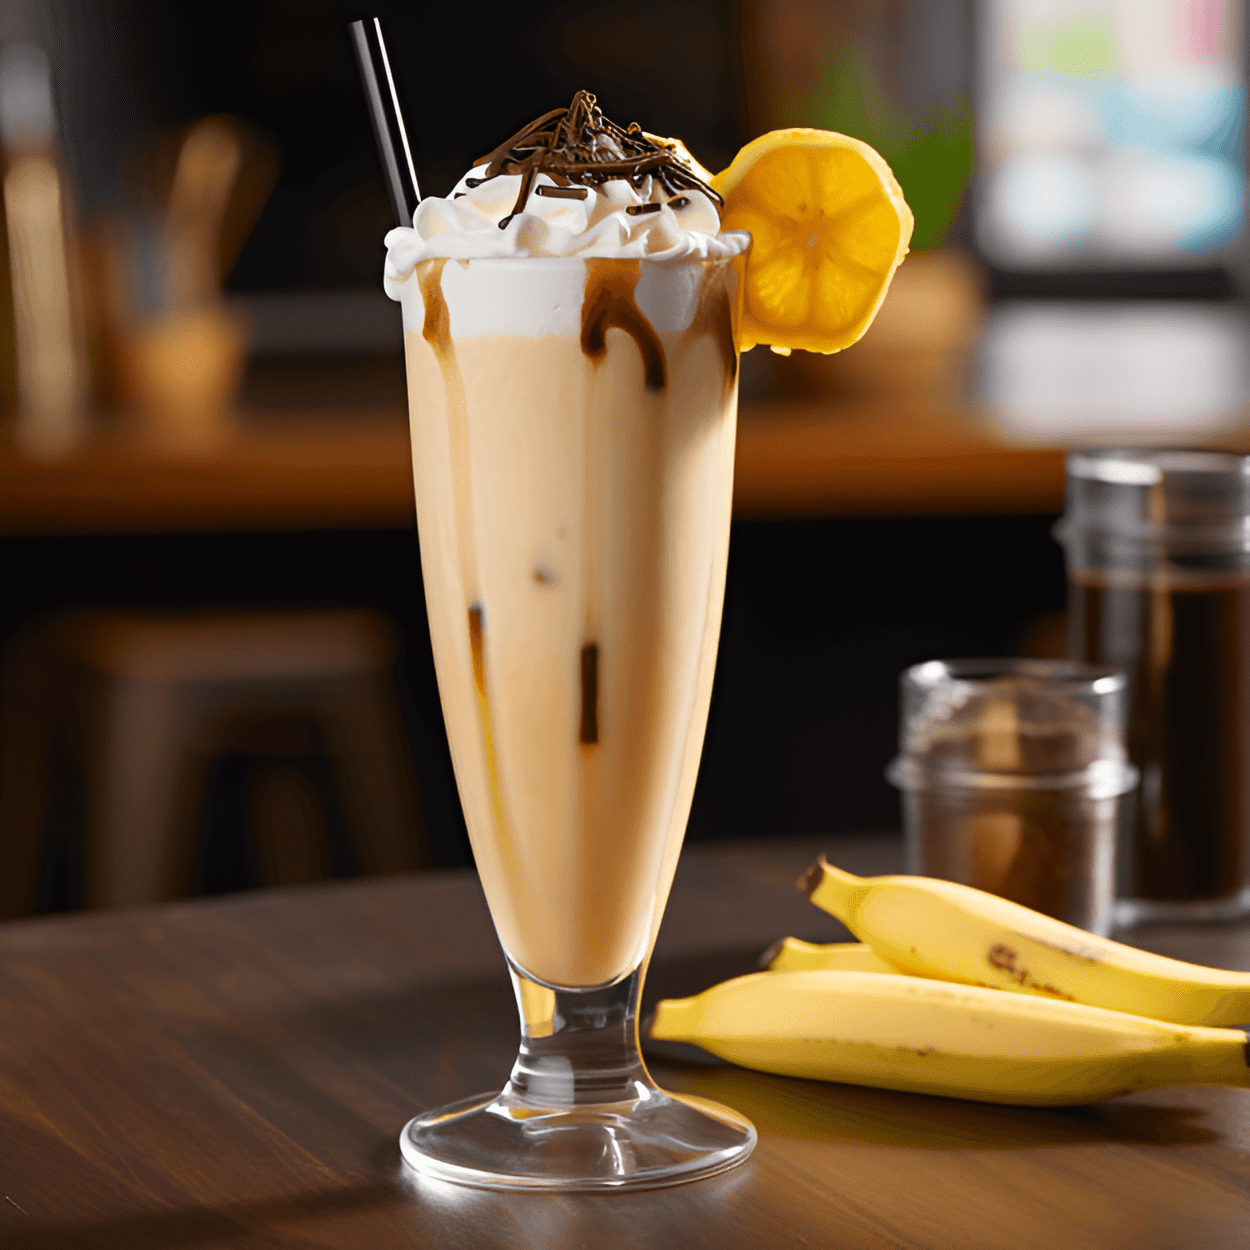 Banana Monkey Cocktail Recipe - The Banana Monkey cocktail is a creamy, smooth, and refreshing drink. It has a sweet, tropical taste with a hint of chocolate. The banana liqueur gives it a fruity flavor, while the cream and chocolate syrup add a rich, velvety texture.